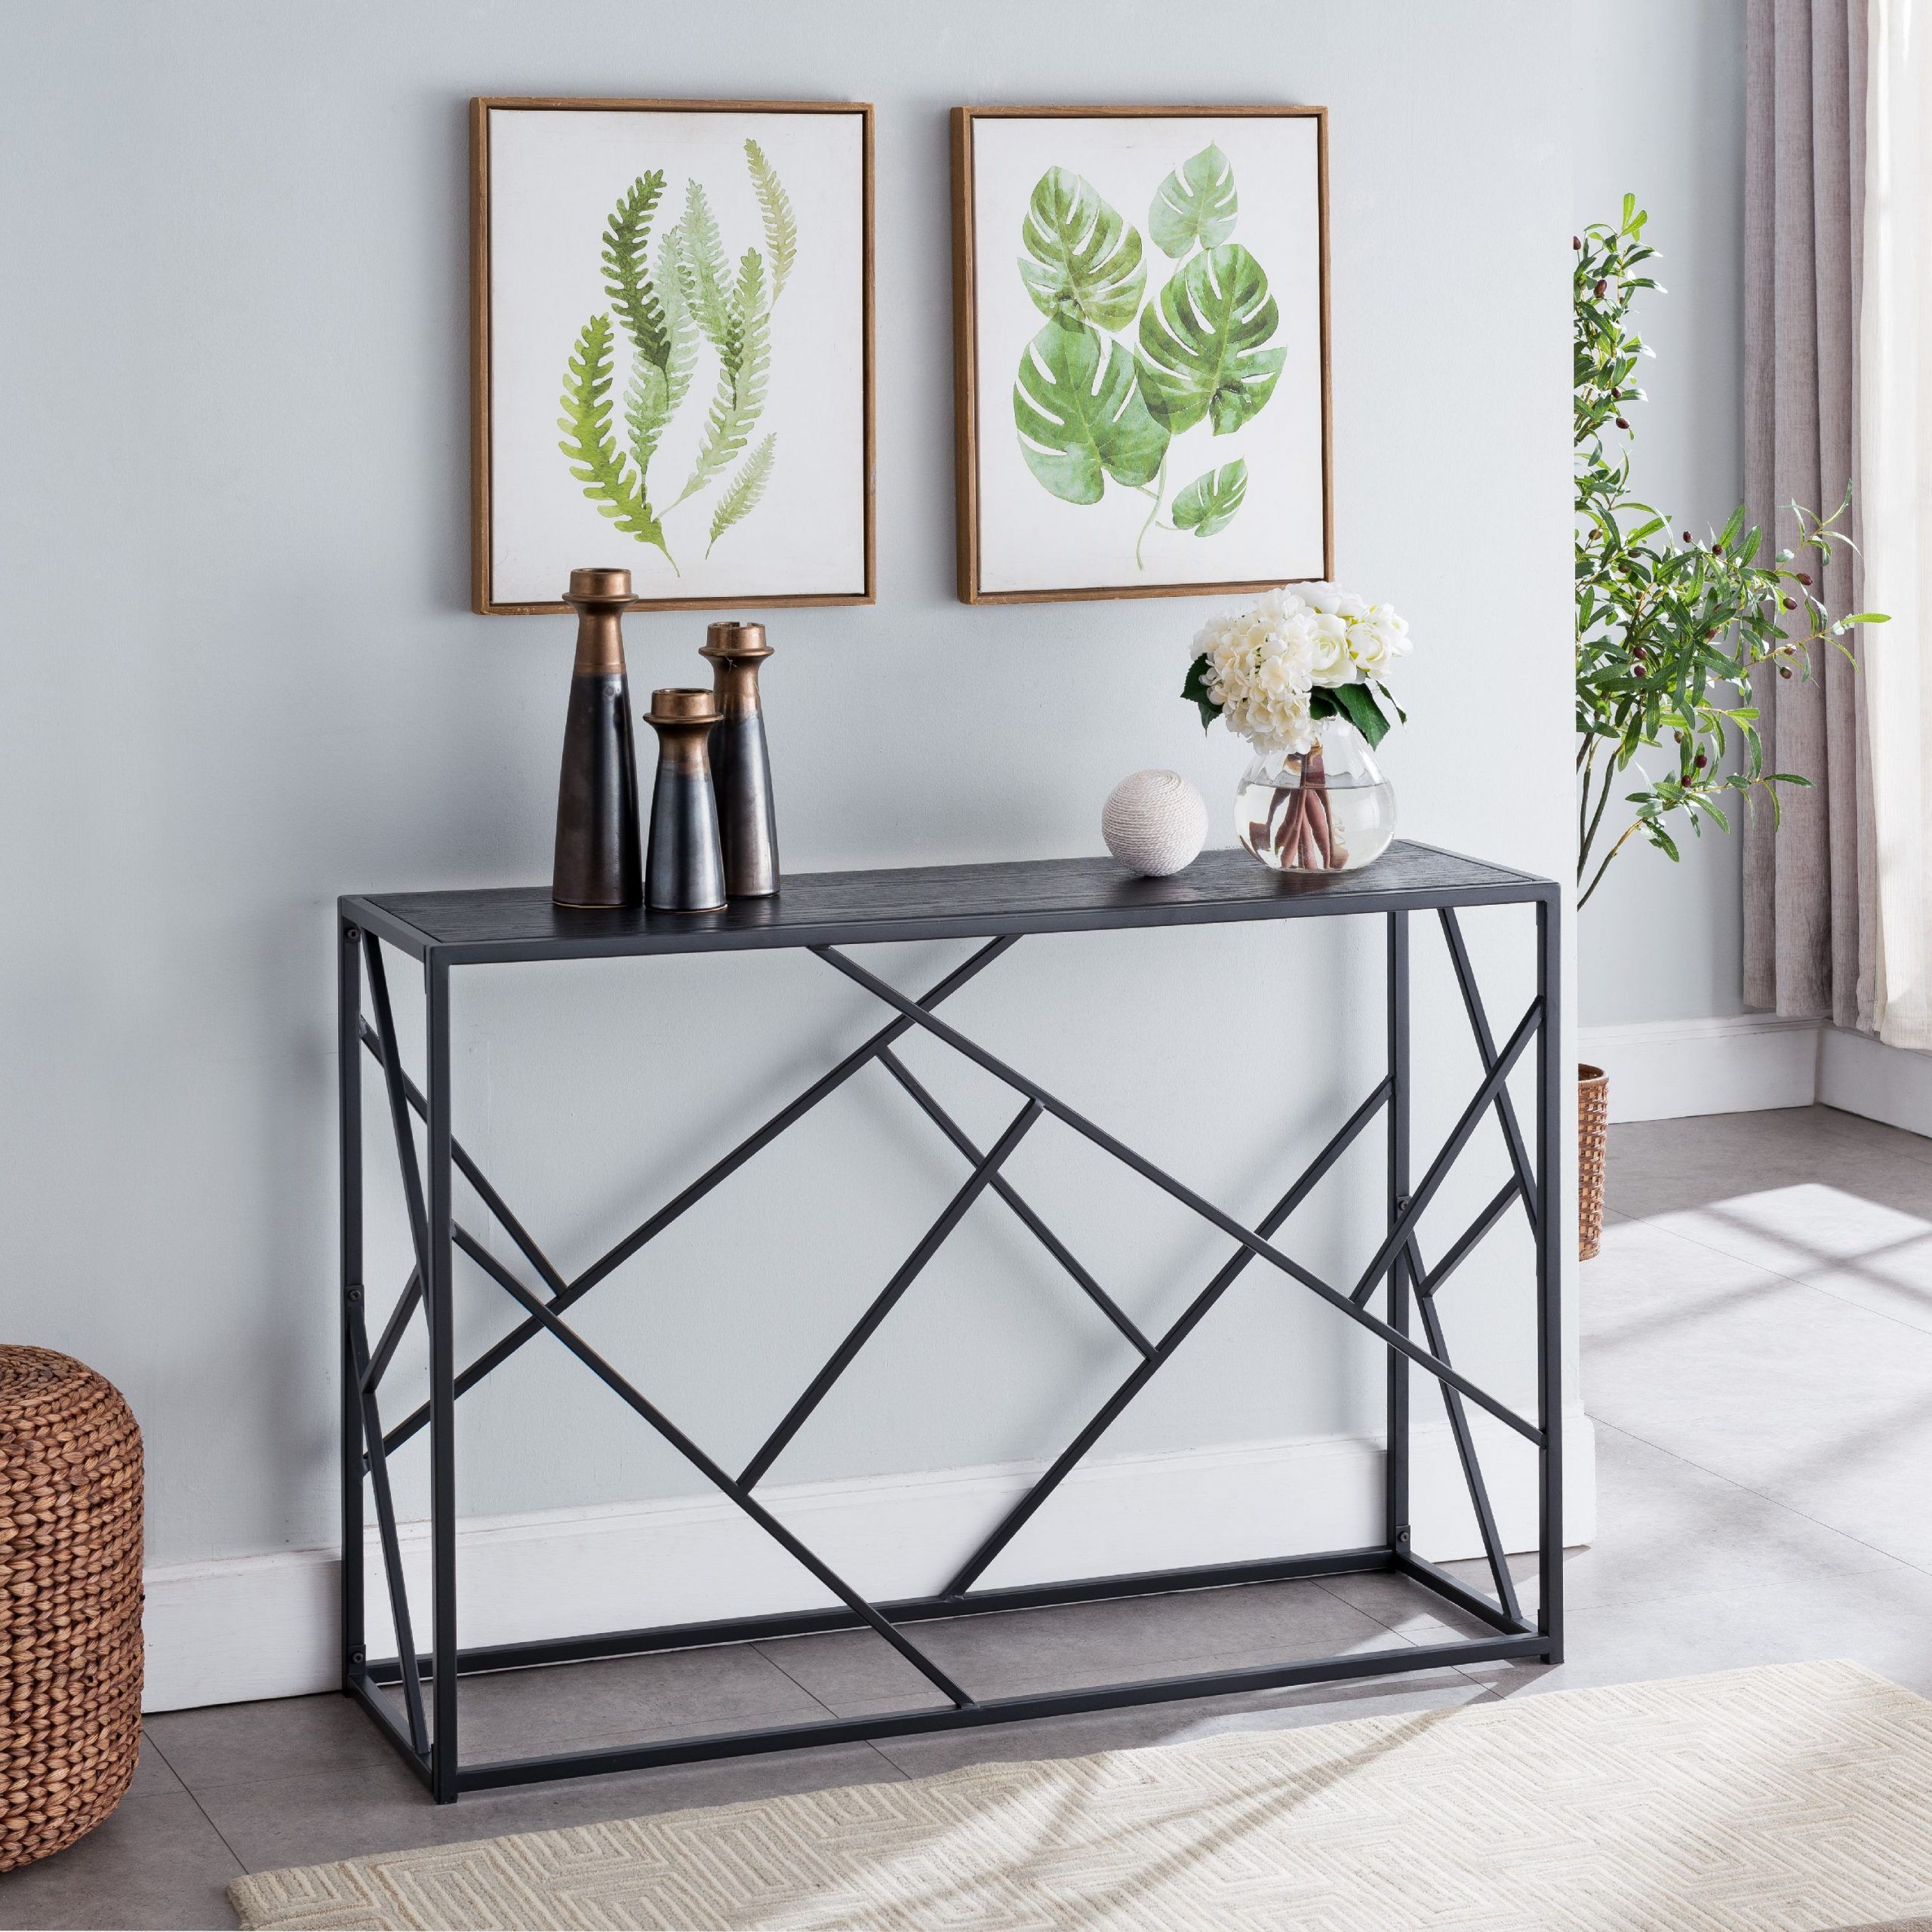 Thurl Modern Entryway Console Sofa Table, Black Metal For Best And Newest Square Modern Console Tables (View 3 of 10)